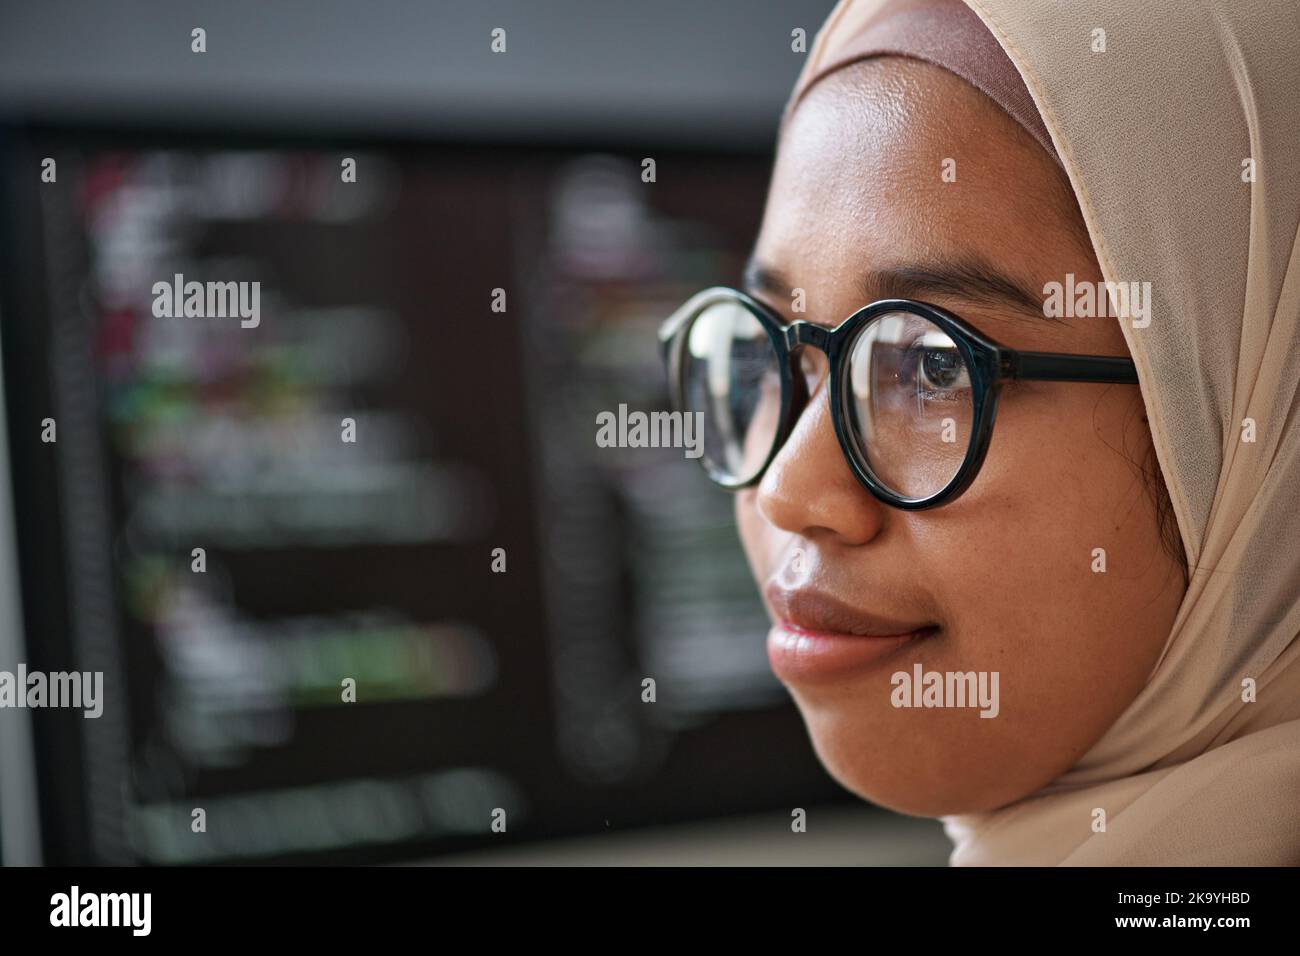 Close-up of face of young confident Muslim intern in hijab and eyeglasses standing in front of camera against computer screen with data Stock Photo